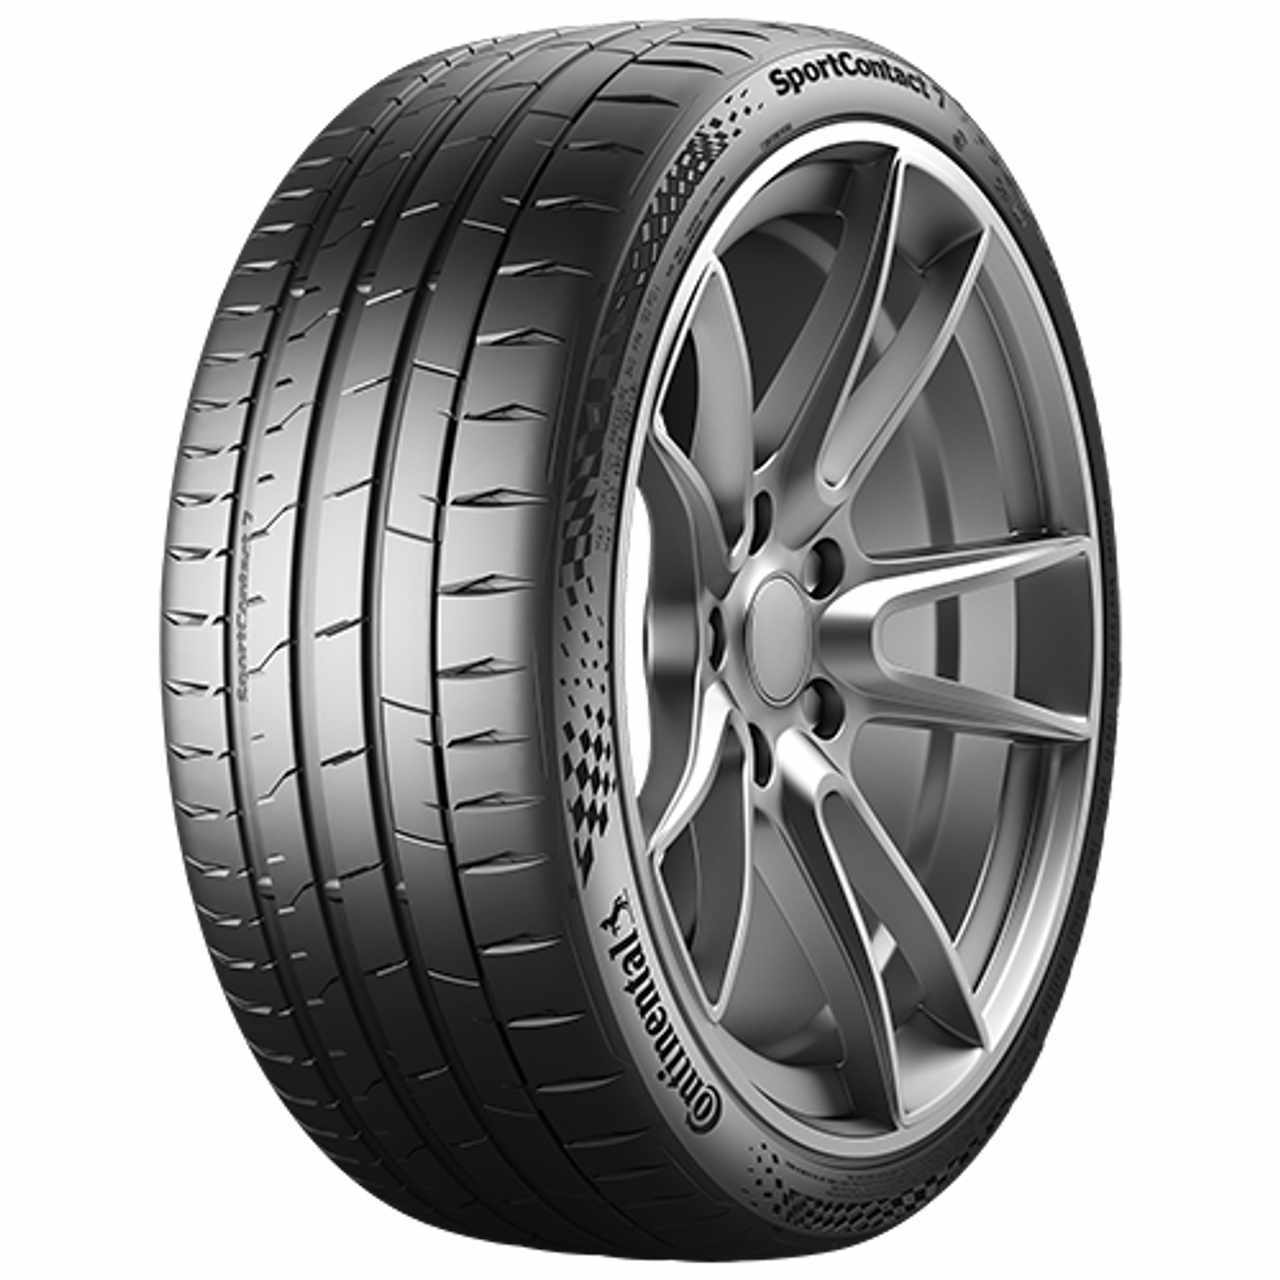 CONTINENTAL SPORTCONTACT 7 235/35ZR19 91Y FR BSW